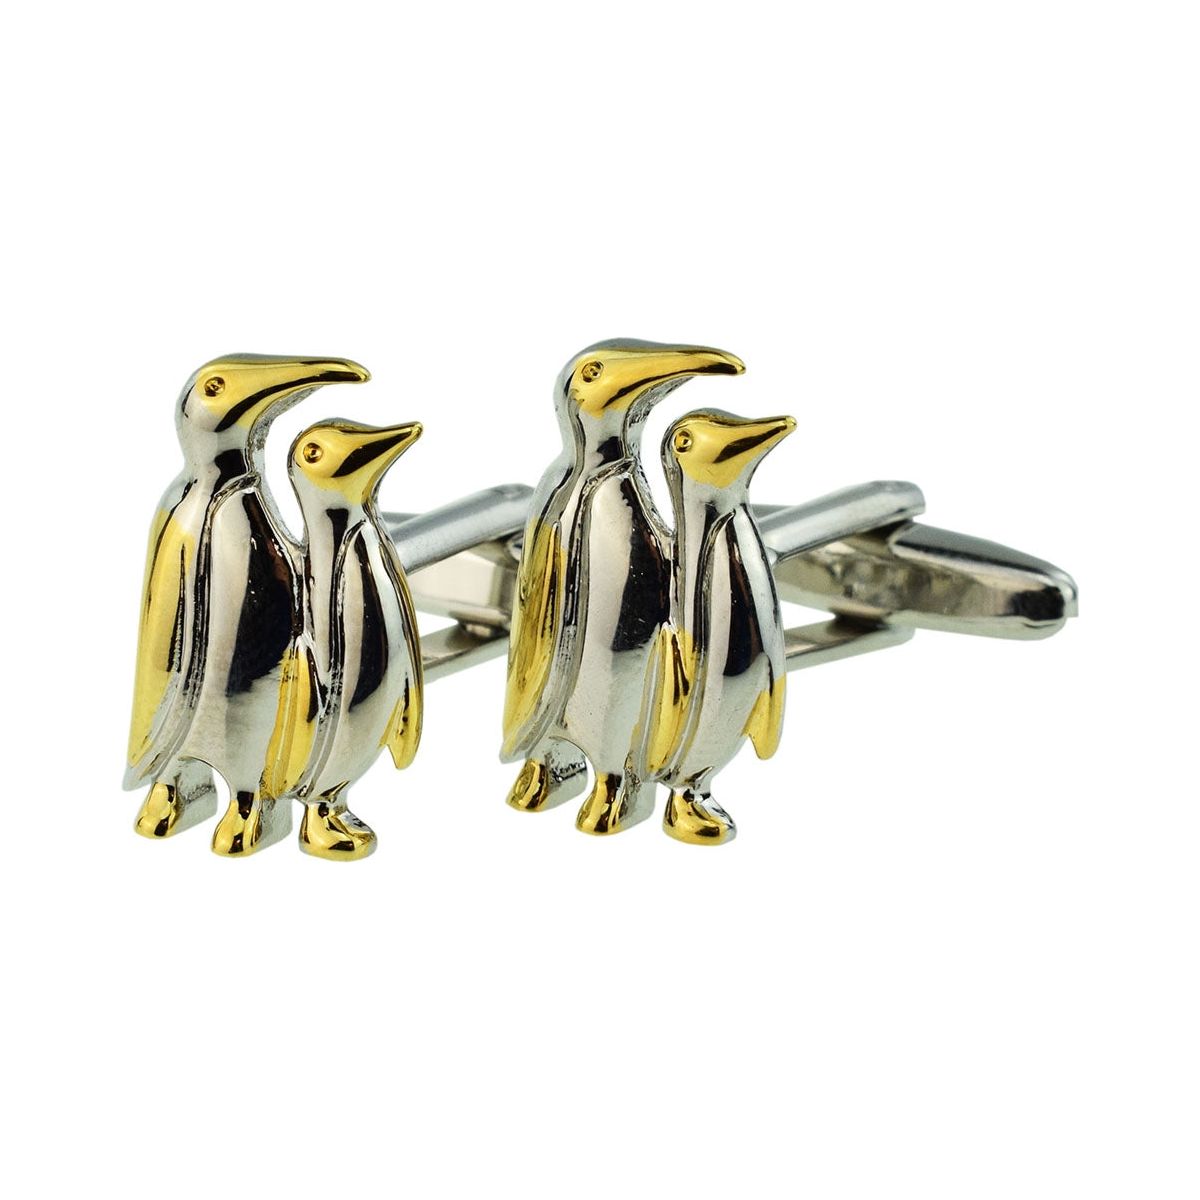 Two Tone Gold & Silver Penguins Cufflinks - Ashton and Finch